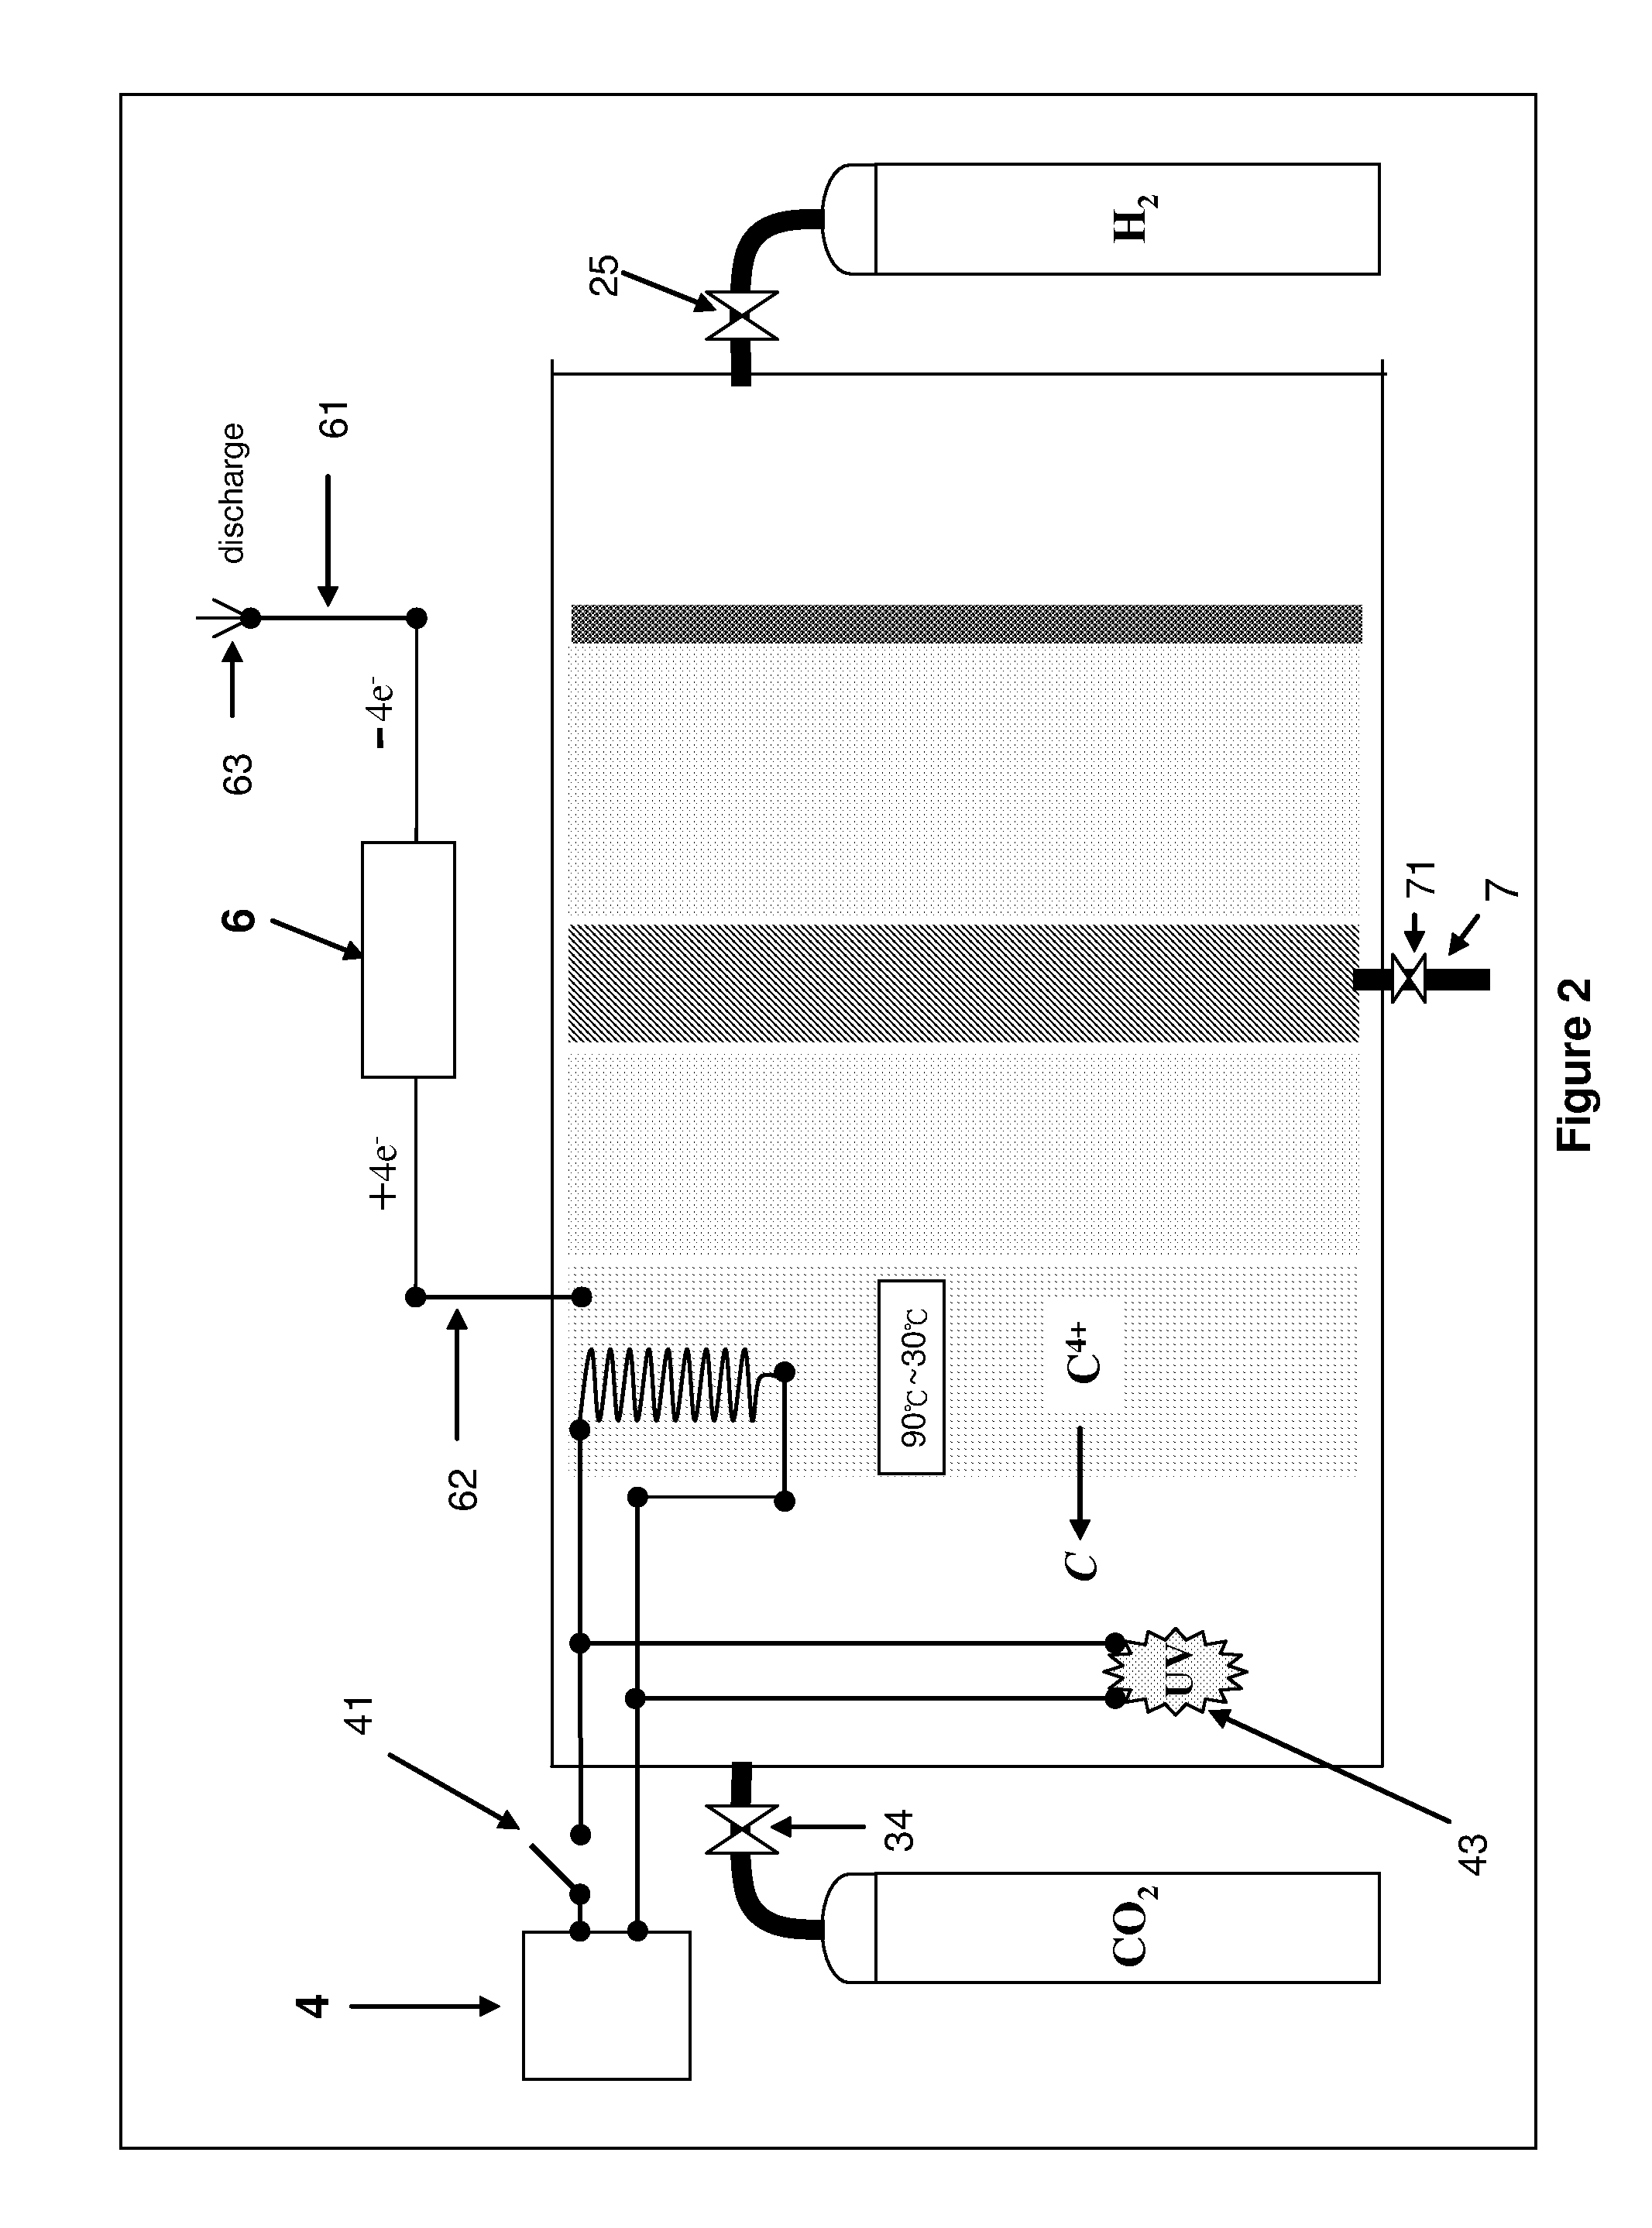 CARBON DIOXIDE DISSOLUTION AND C4+nM STATE CARBON RECYCLING DEVICE AND METHOD